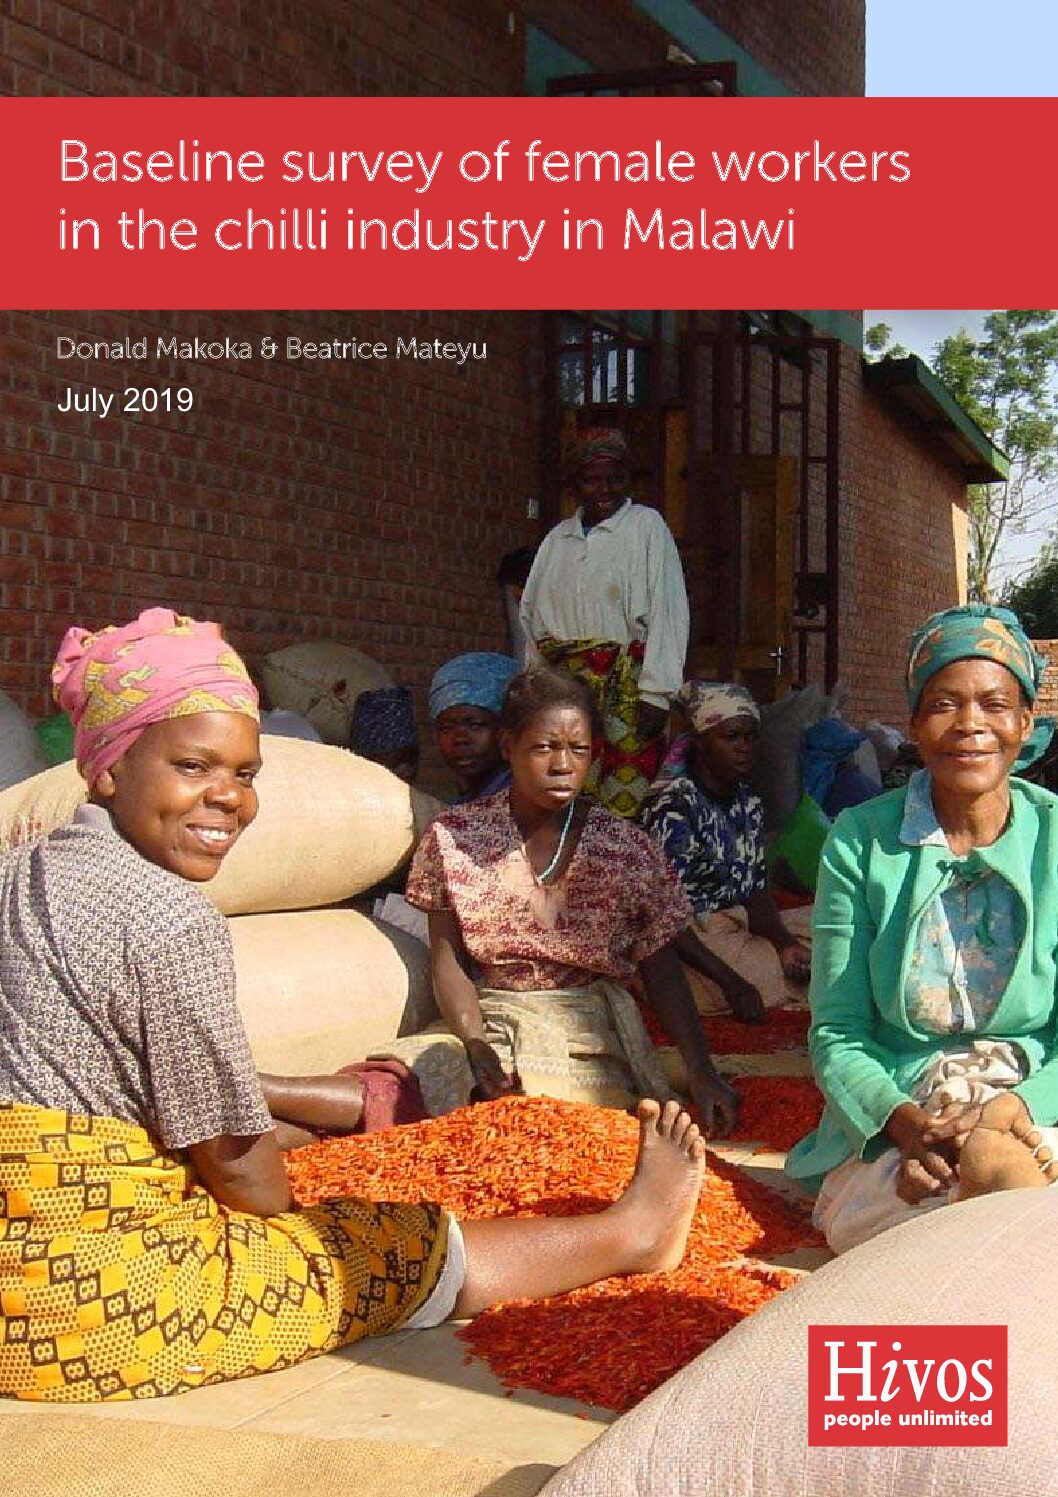 Baseline survey of female workers in the chilli industry in Malawi